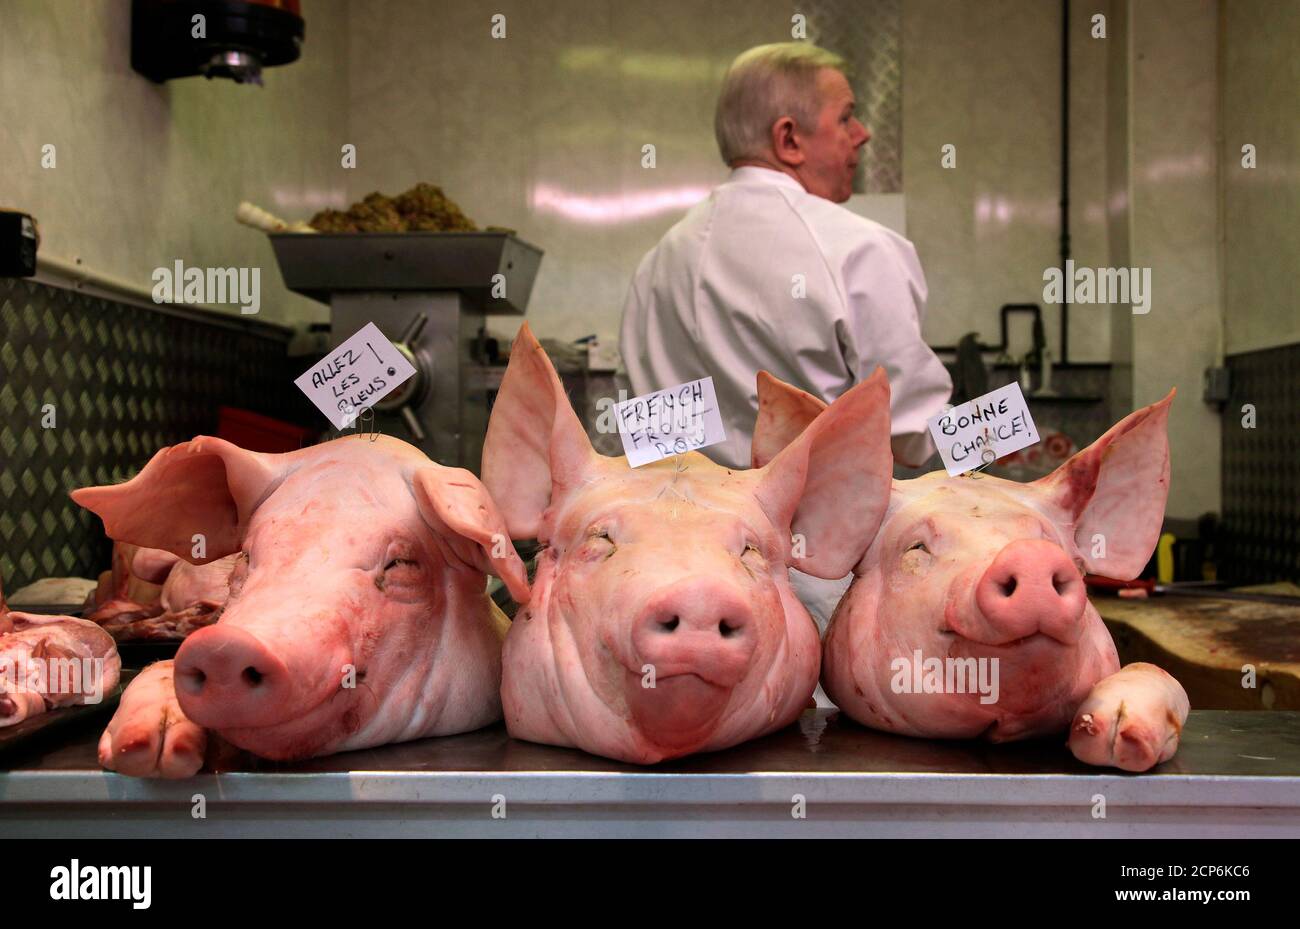 A butcher shows his support for the French rugby team by sticking messages  on pigs' heads before the team's Six Nations rugby union match against  Wales in Cardiff March 17, 2012. The